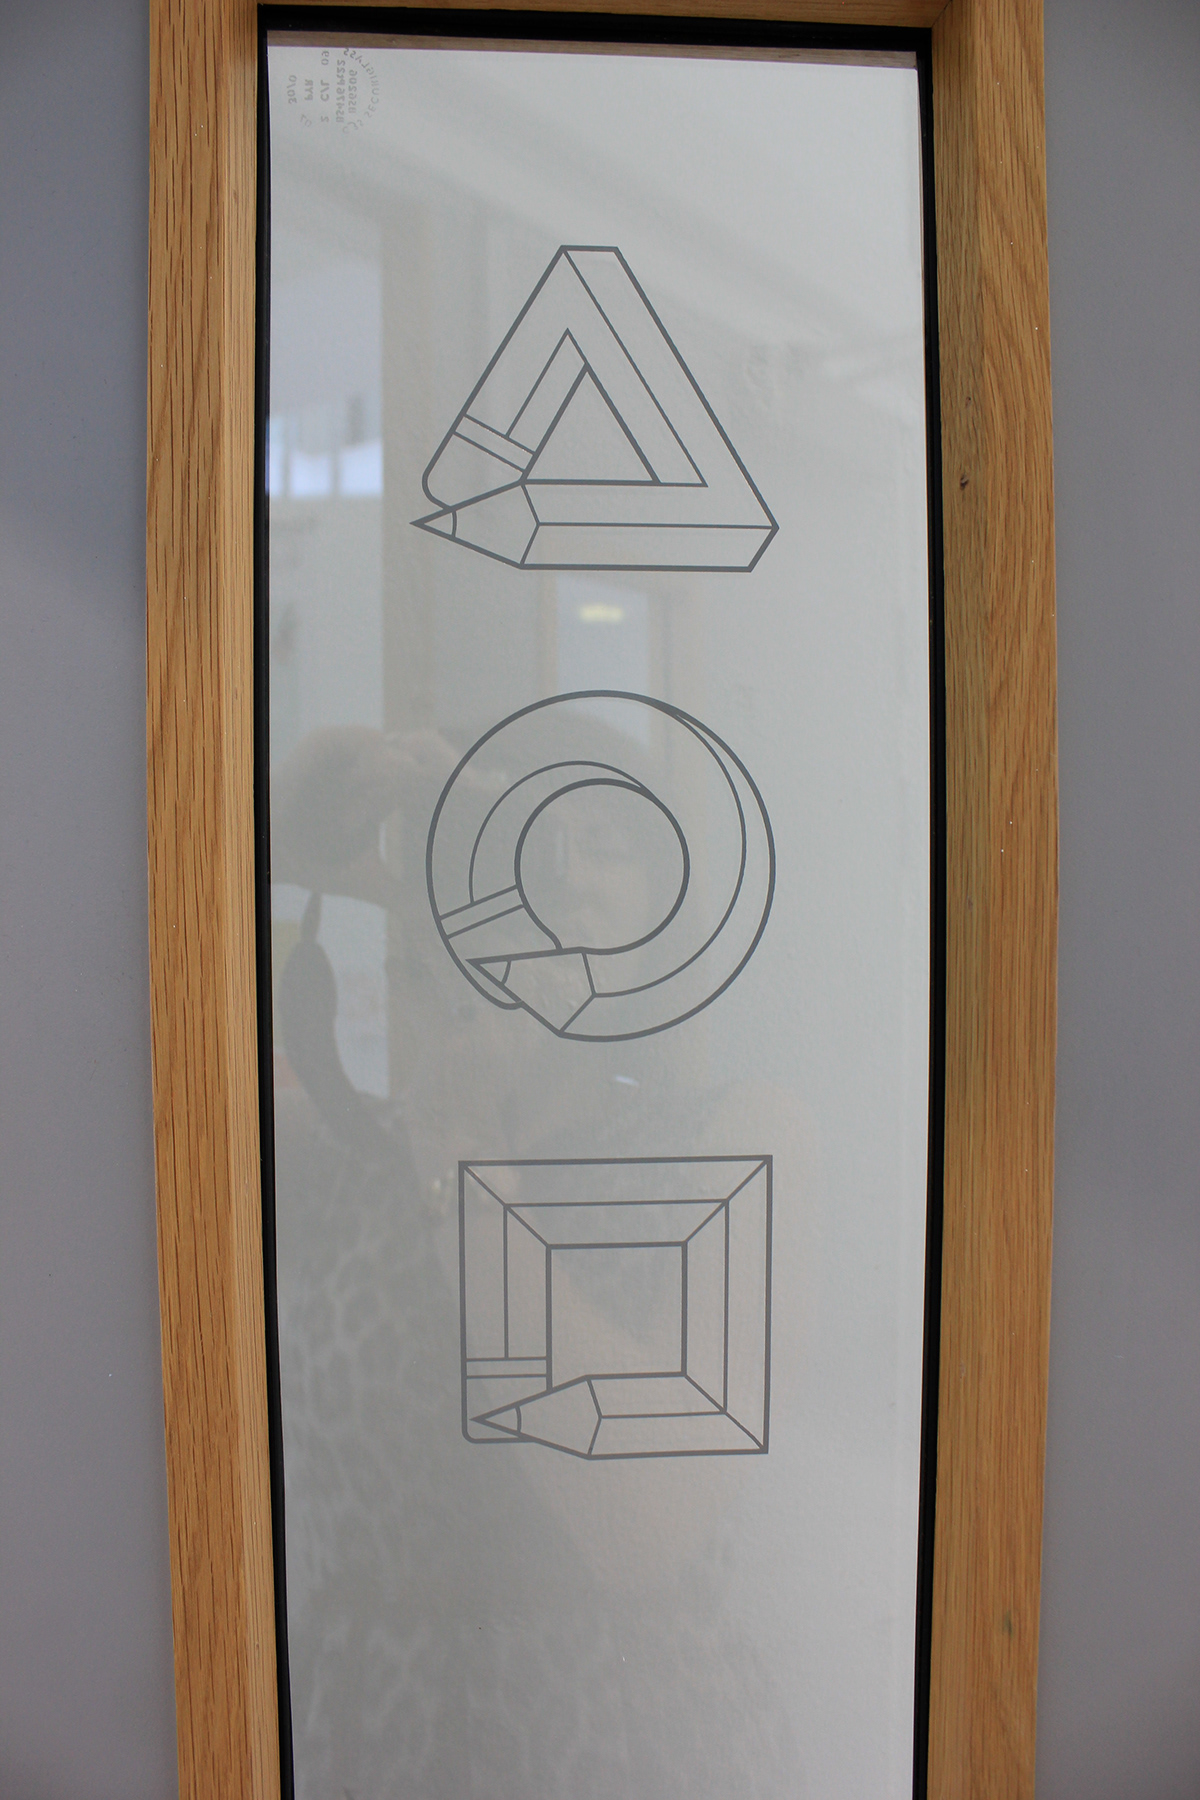 University of Derby Derby Uni The BIG Show vision Degree Show 2013 Exhibition  icons pictograms